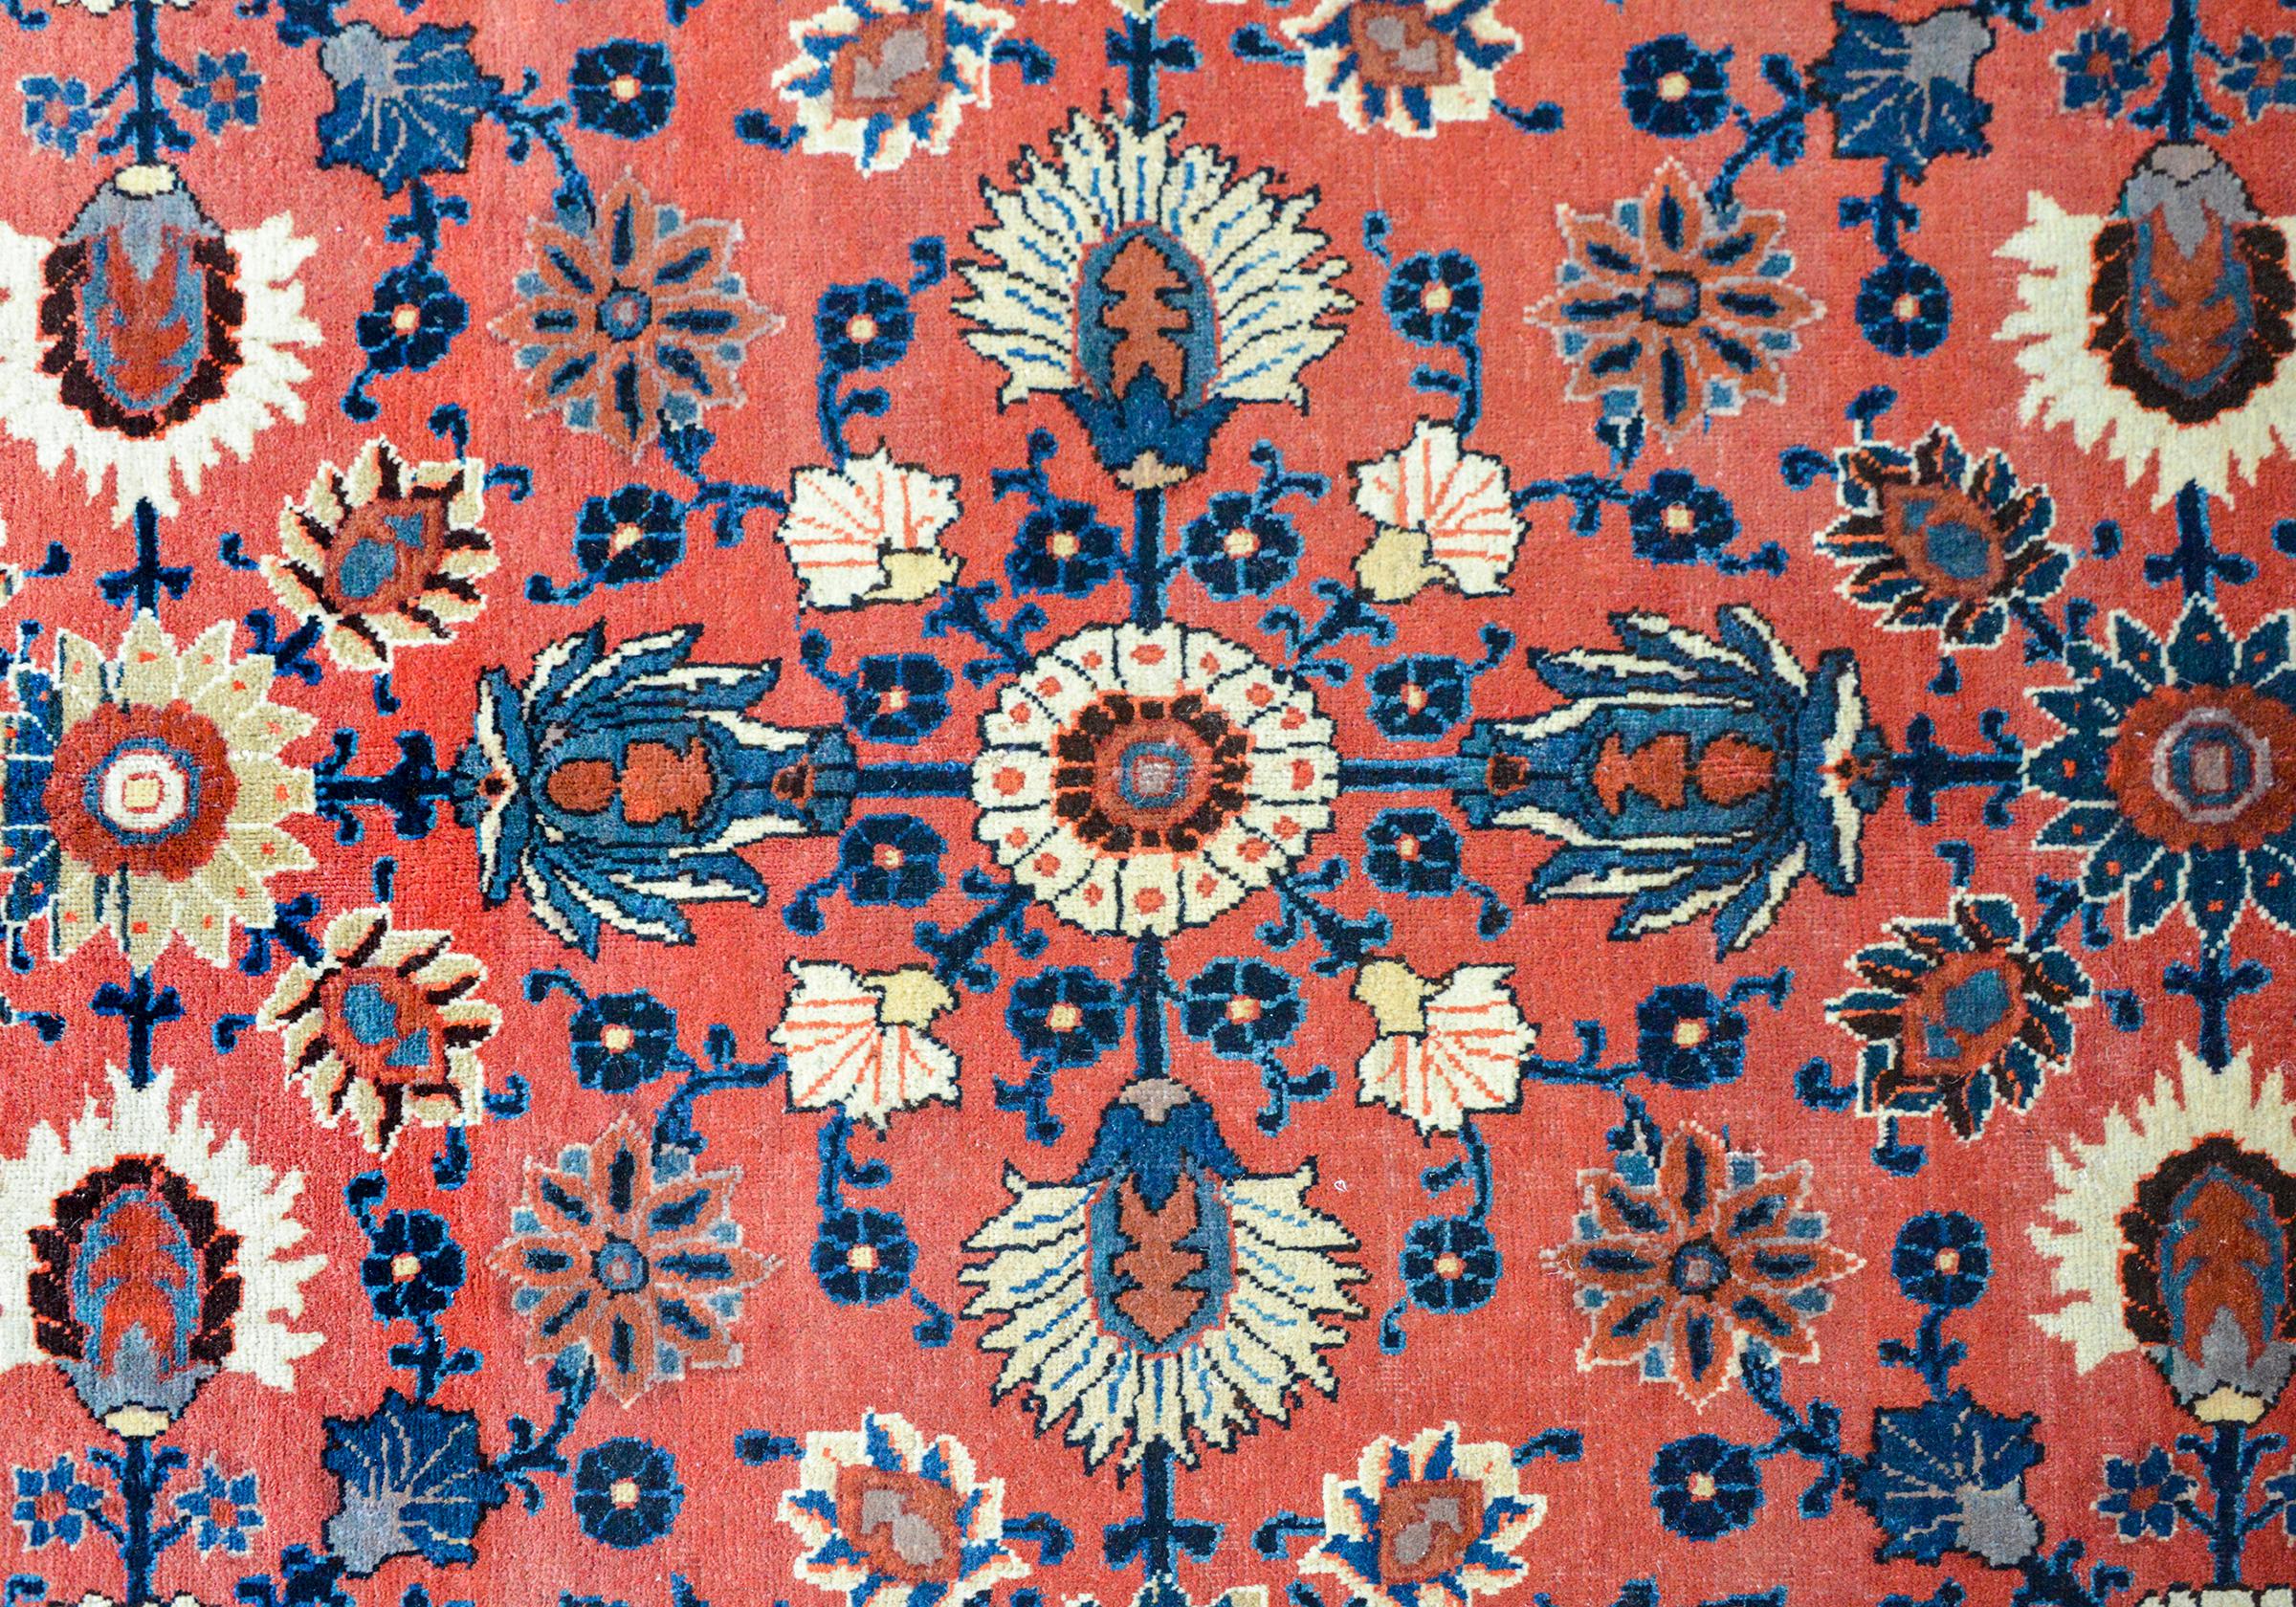 A vintage bold Persian Bakhtiari rug with a wonderful large-scale mirrored floral pattern woven with large flowers and leaves in crimson, pink, light and dark indigo, and cream, against a light crimson background. The border is fantastic with a wide